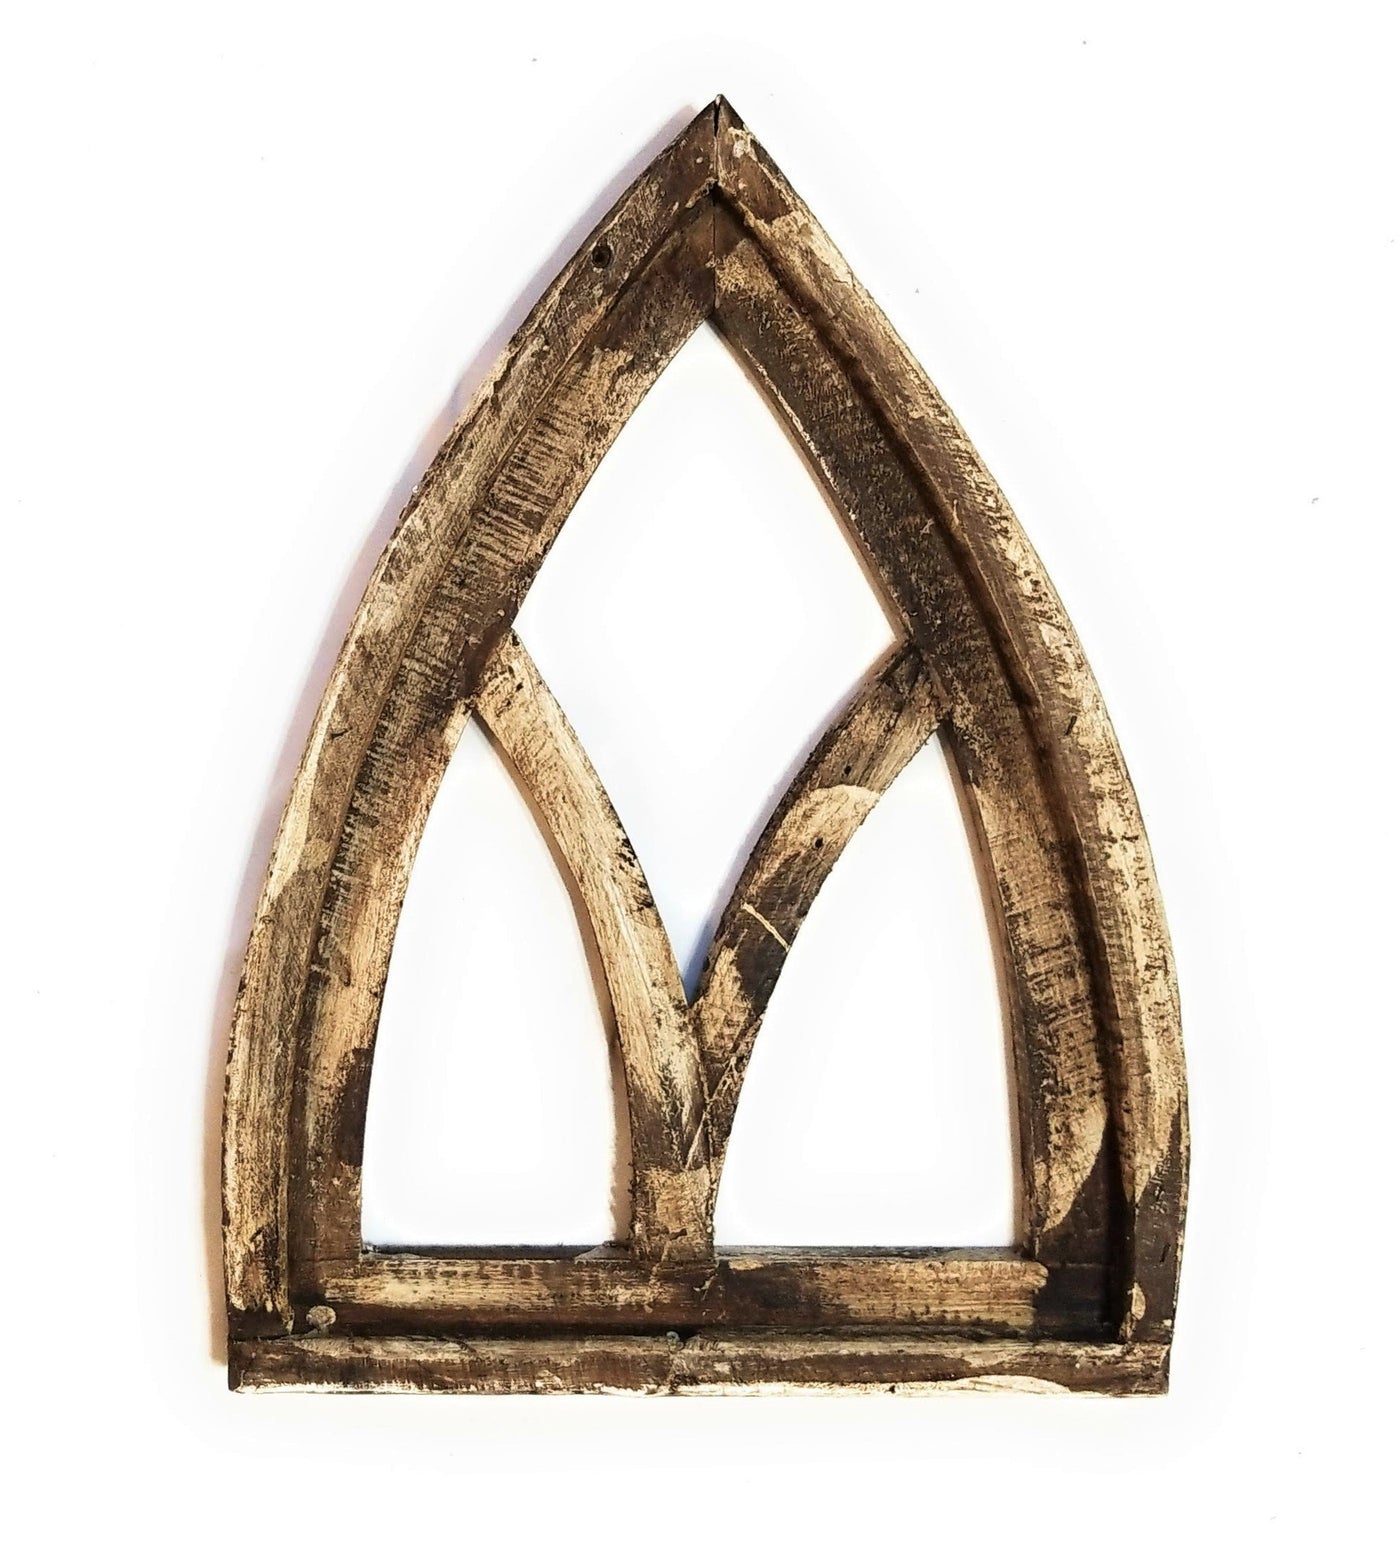 Mini Cathedral Wood Window - The Mini Cathedral- 2 Colors - Buy 1 or A Set of 2 Available - Ranch Junkie Mercantile LLC